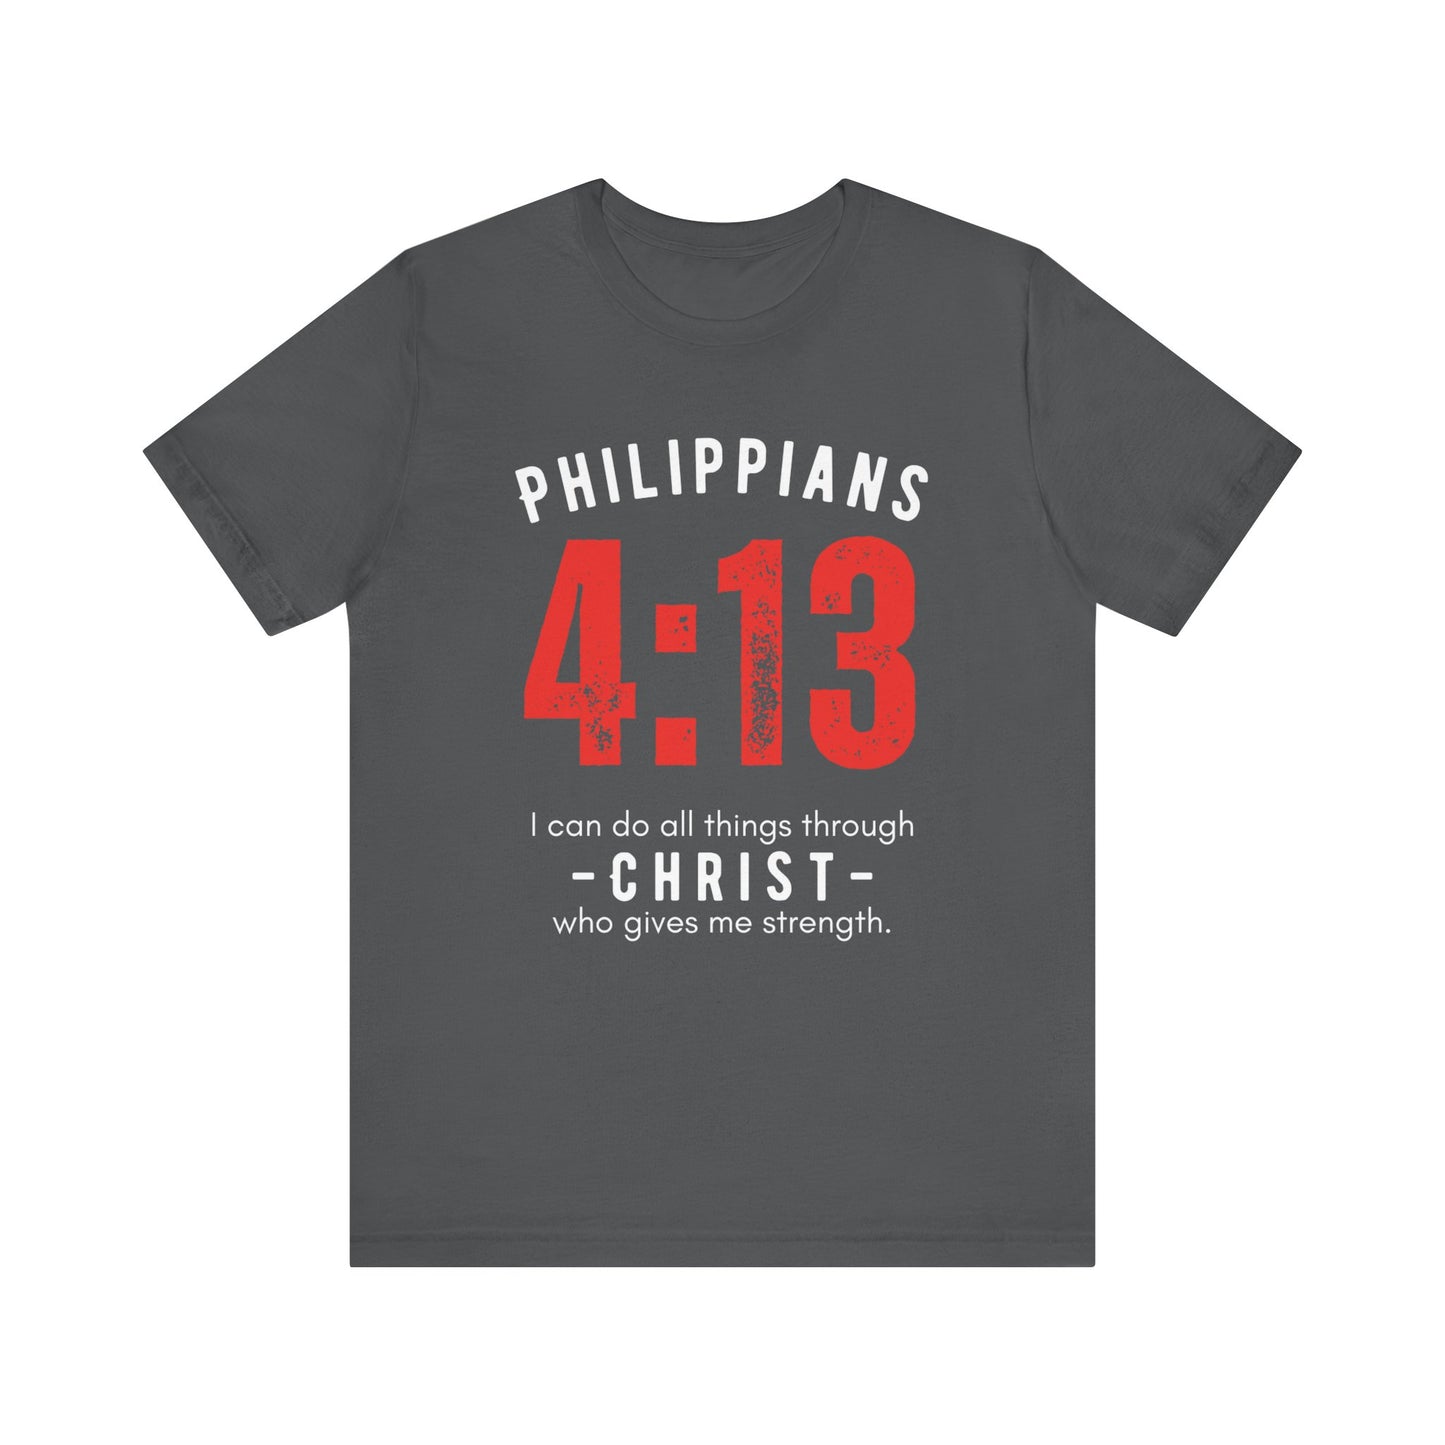 Philippians 4:13 "All Things In Christ" T-shirt for Men and Women 30% off